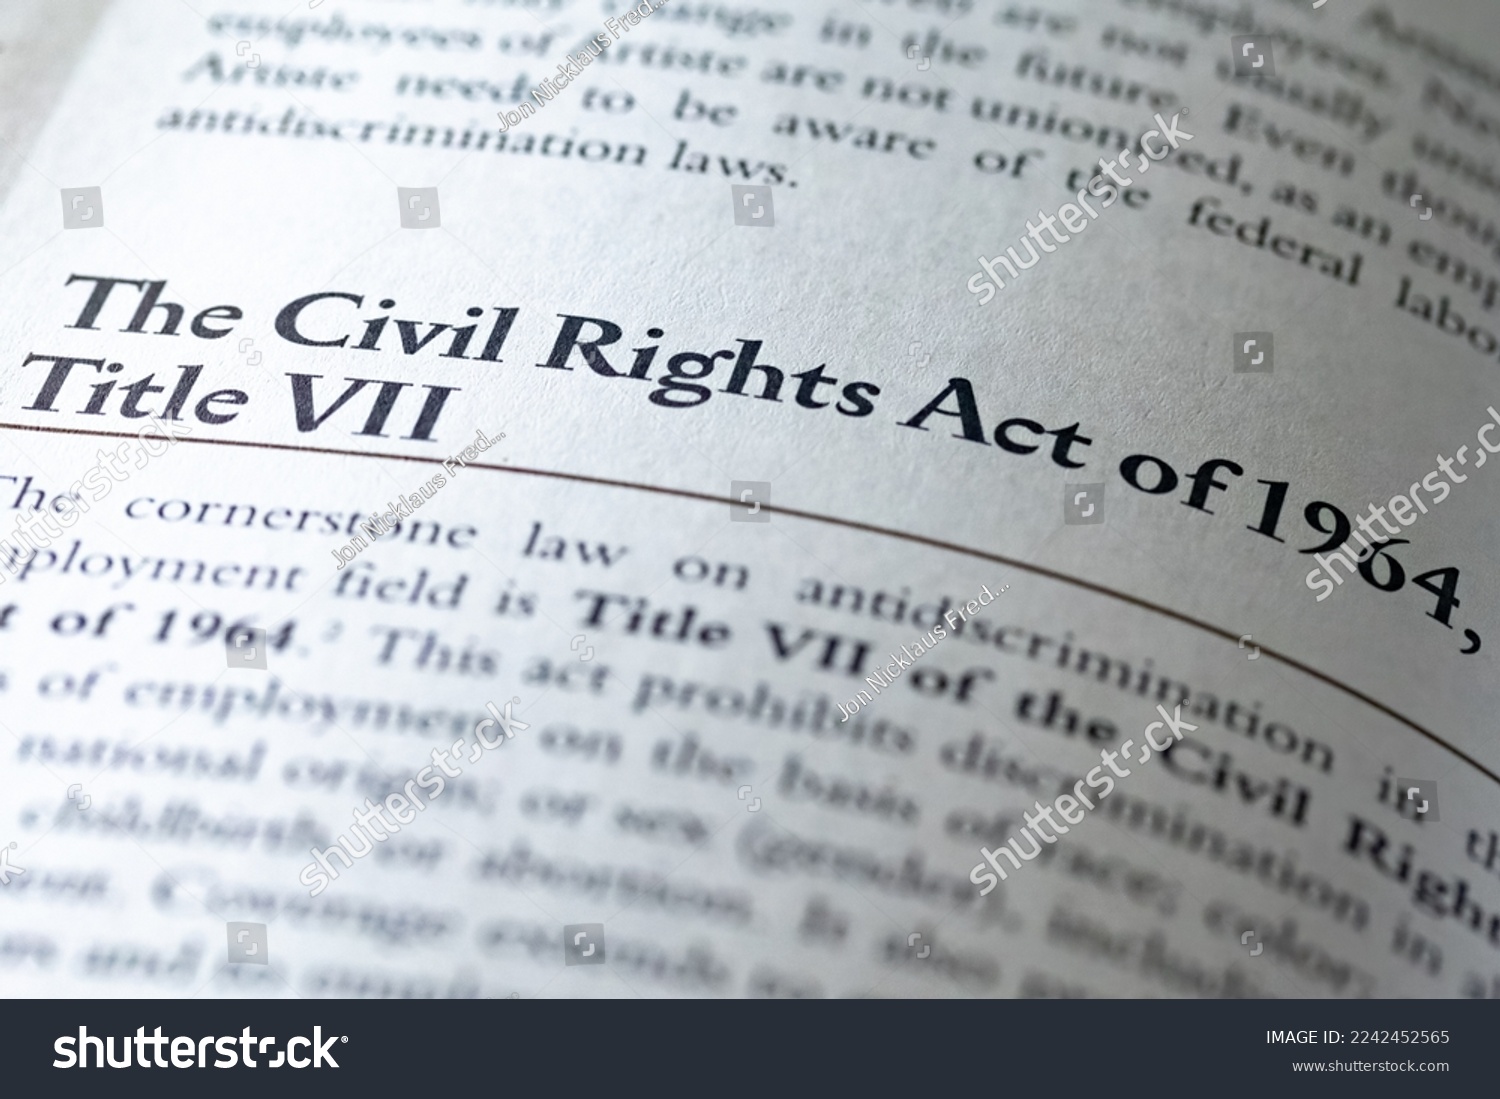 Civil Rights act of 1964 title vii written in business ethics textbook #2242452565